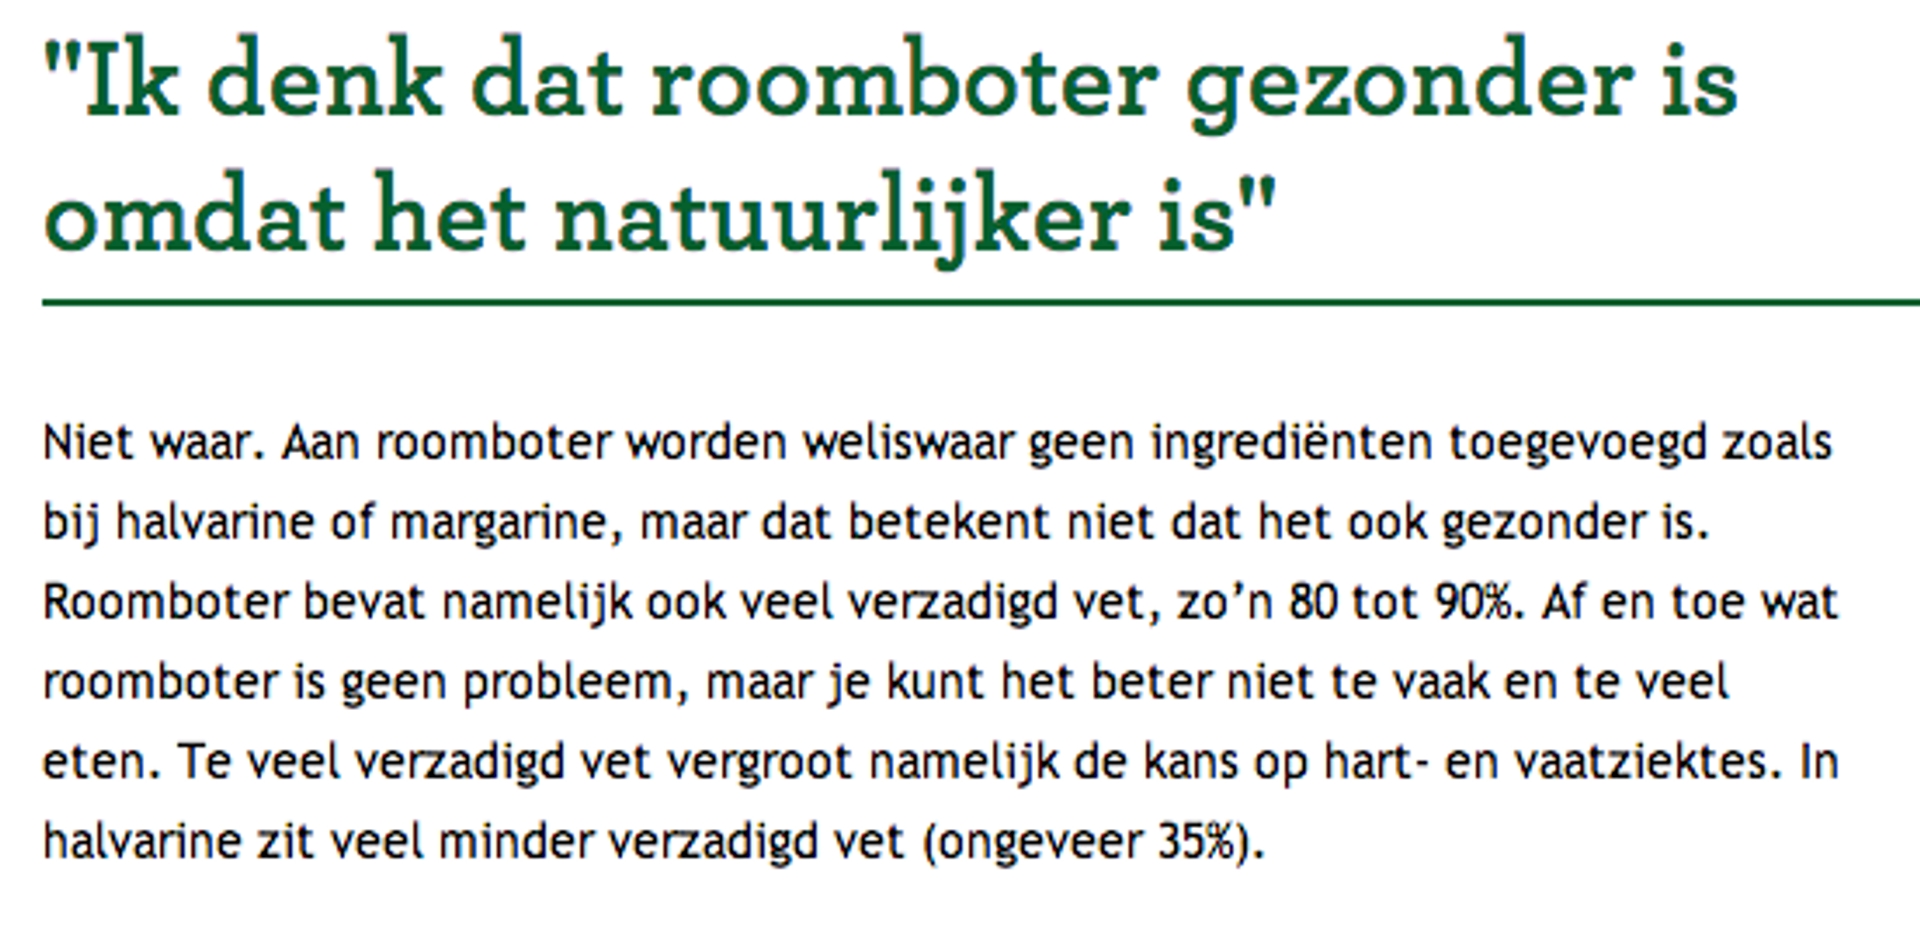 RTEmagicC_Voedingscentrum-roomboter.png